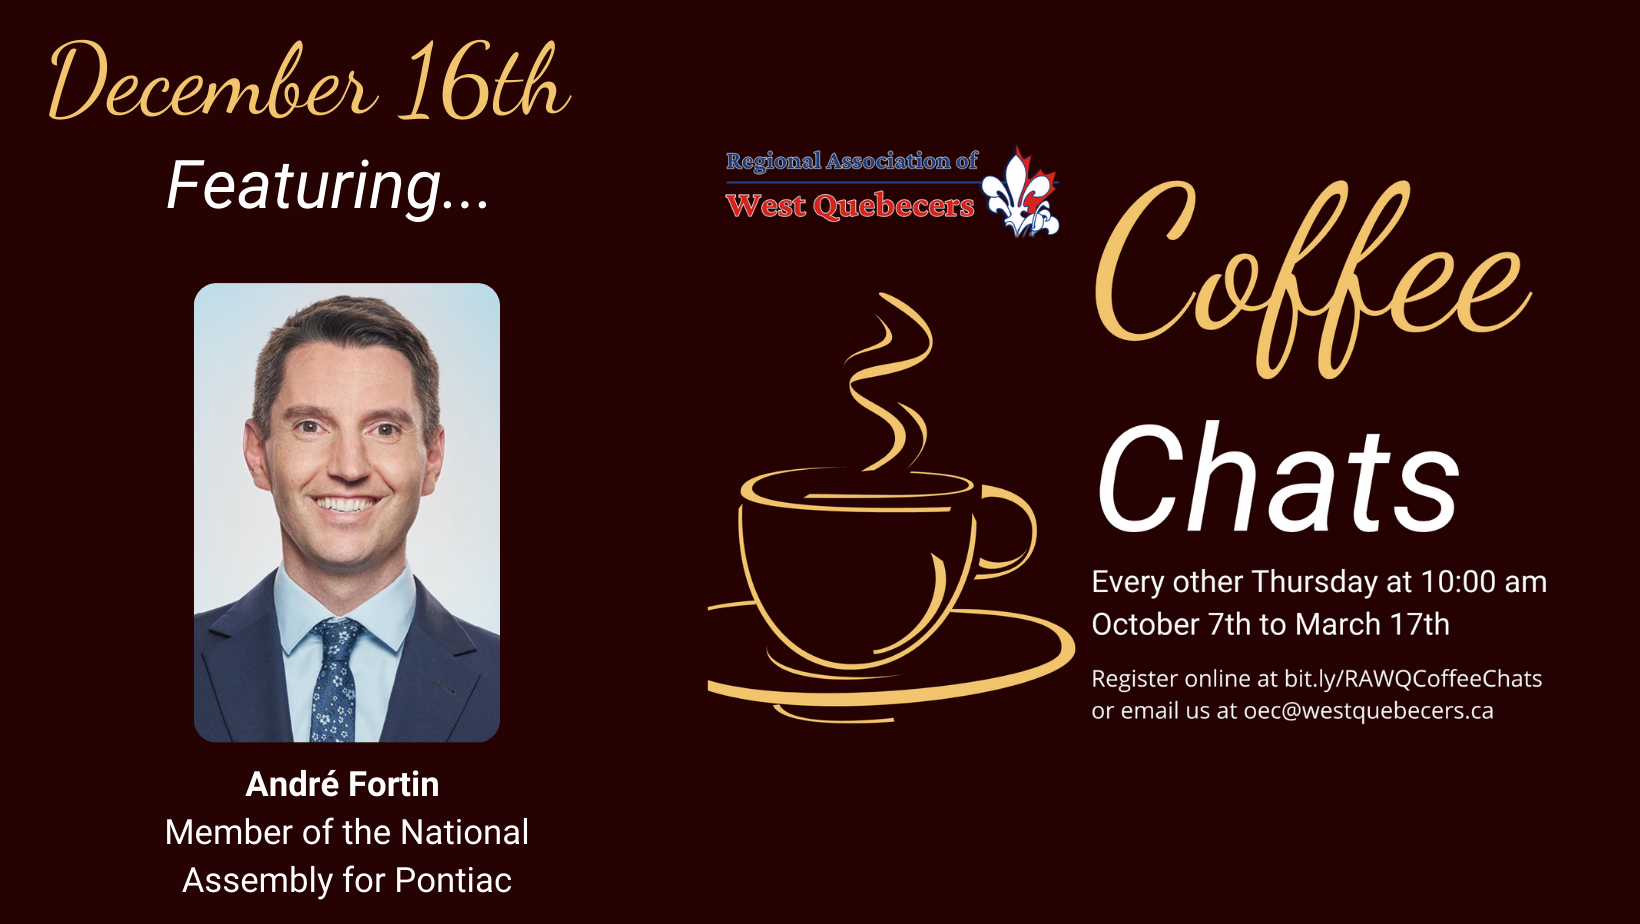 Copy of Coffee Chat 2021 1640 x 924 px v4